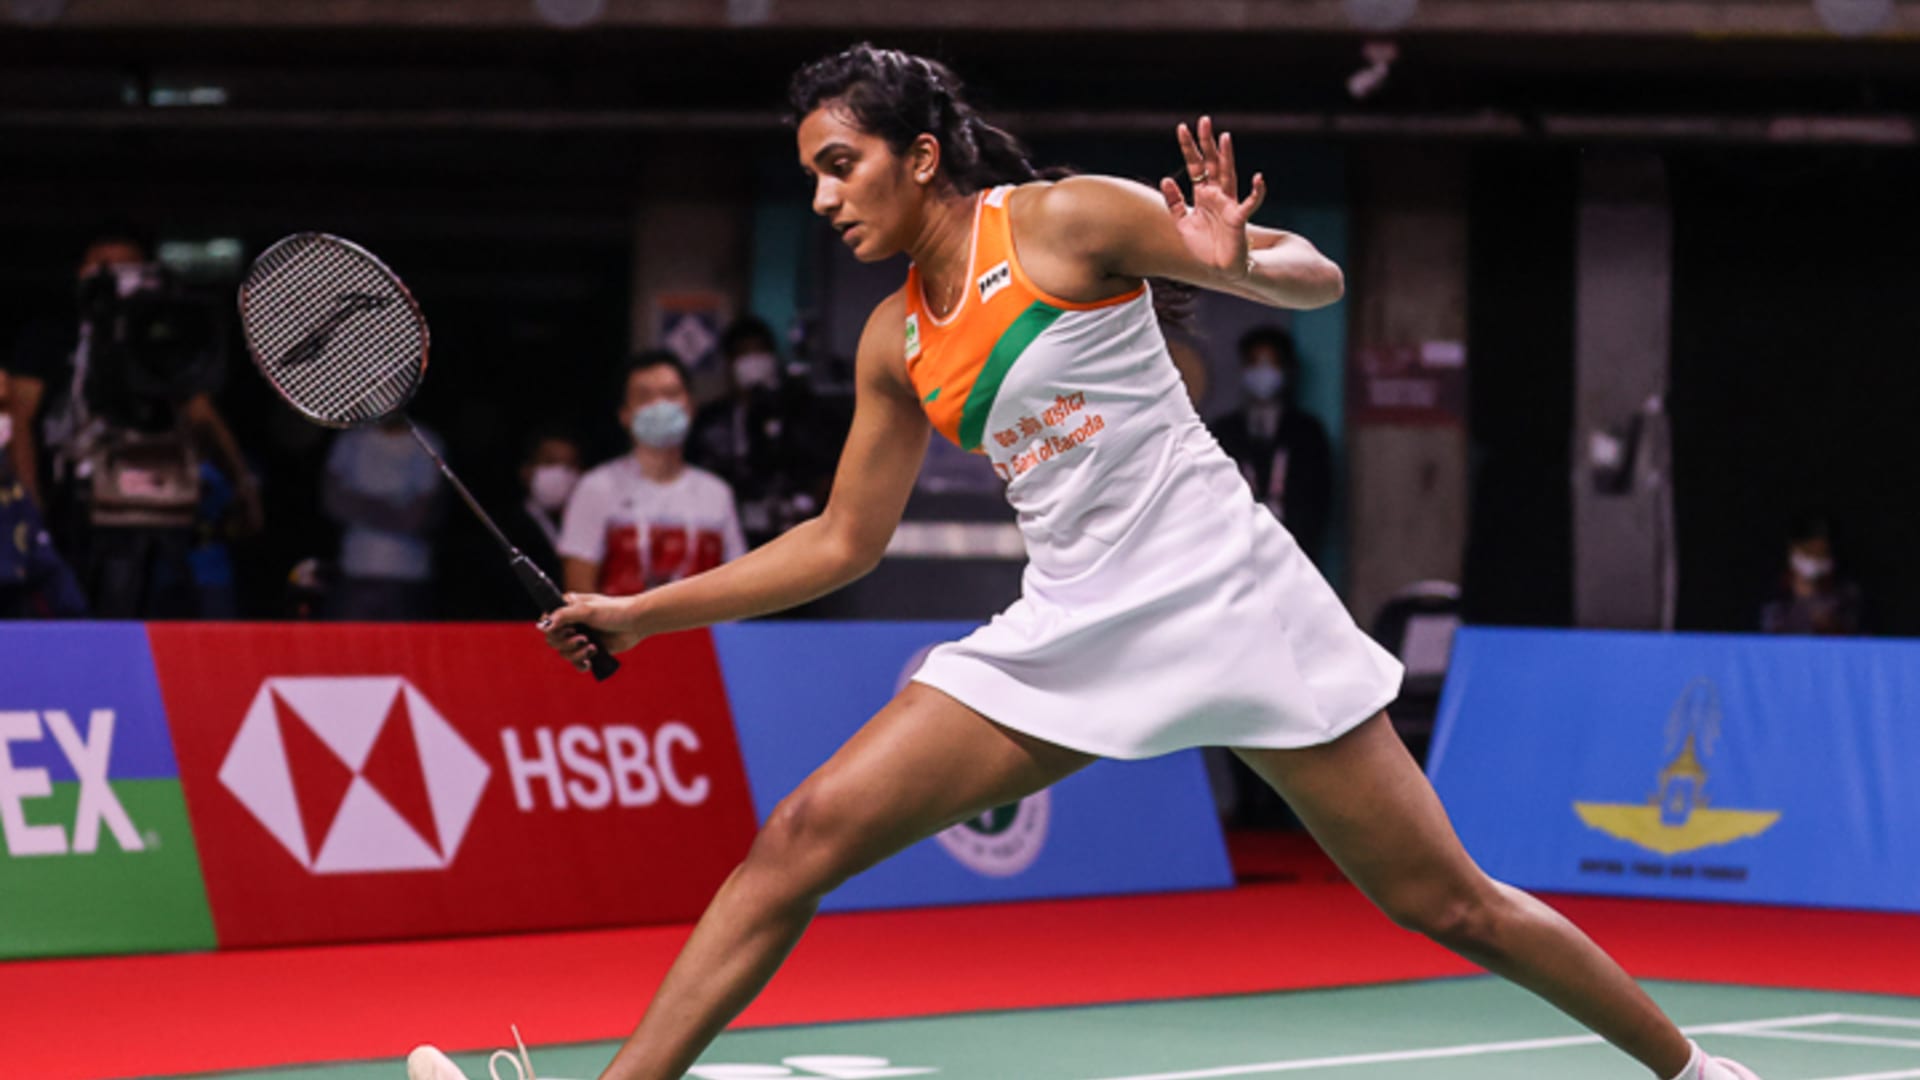 Toyota Thailand Open live Saina Nehwal, PV Sindhu in round 1 action, live match updates, badminton scores and results